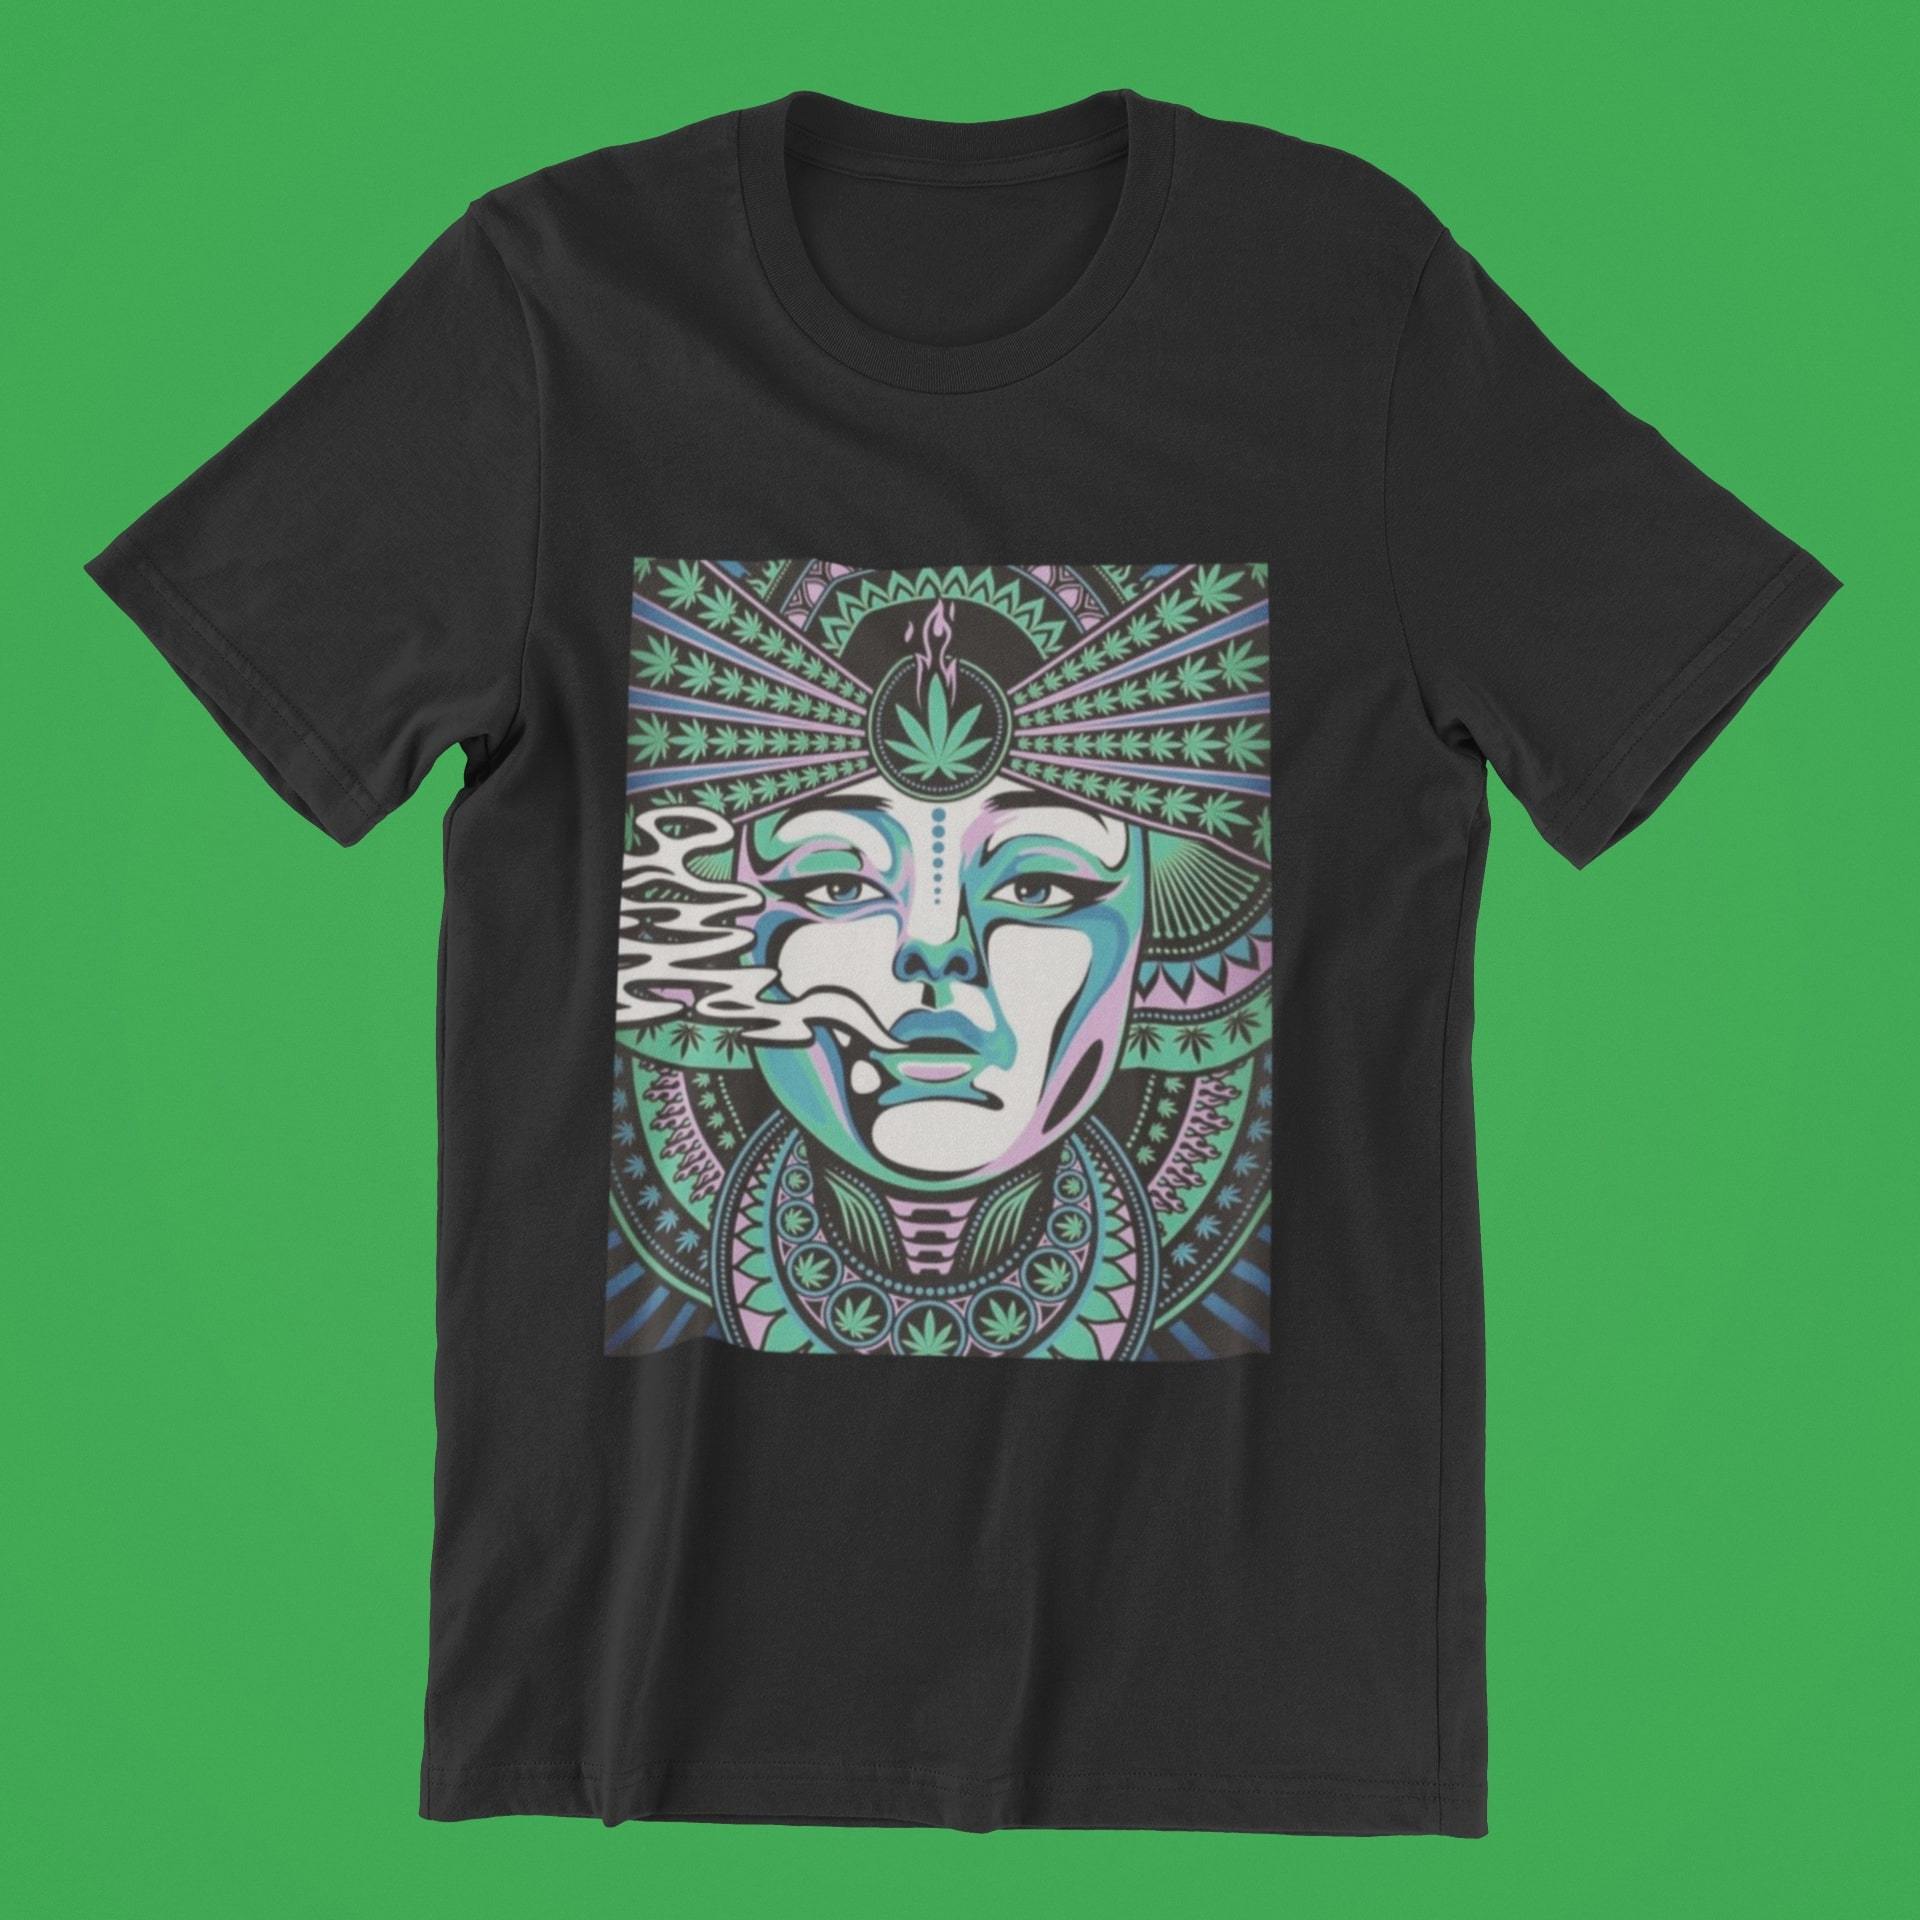 Psychedelic Weed Smoking Art Inspired T shirt for Men - Insane Tees